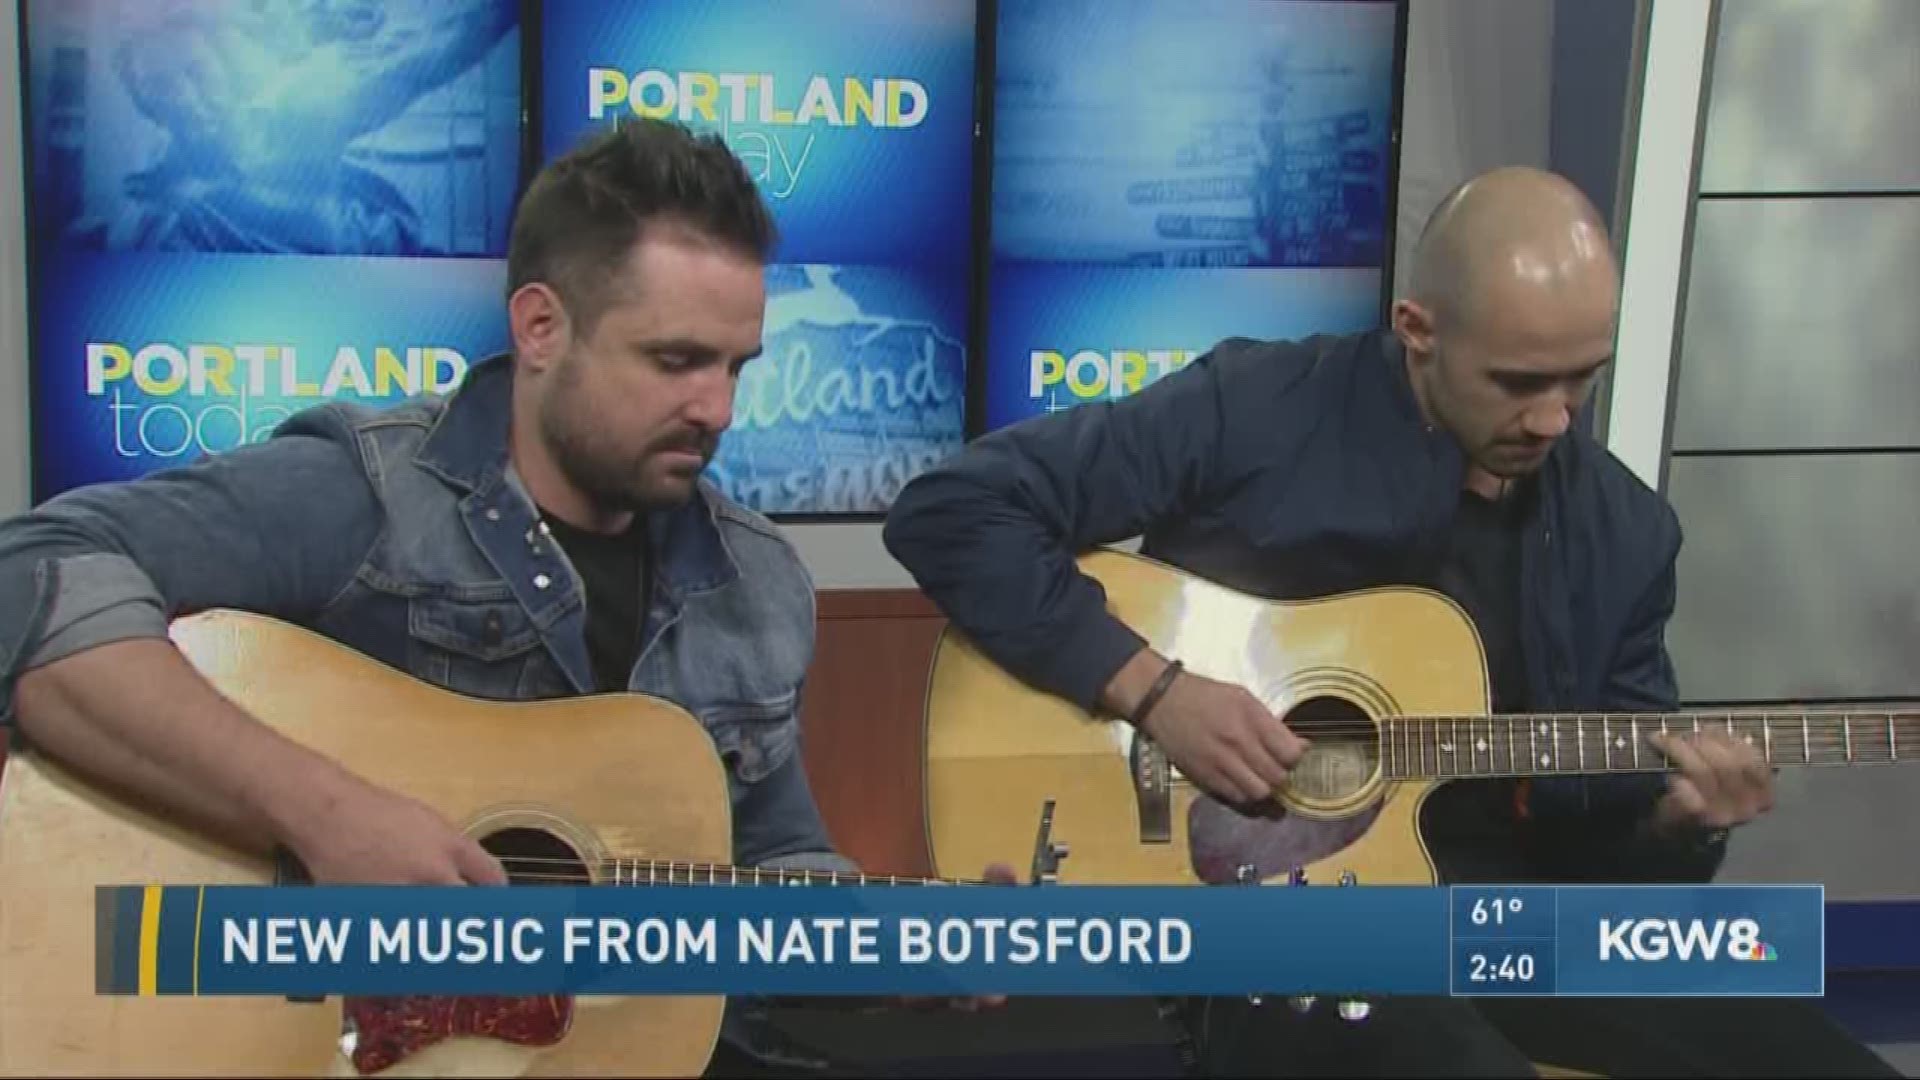 New music from Nate Botsford